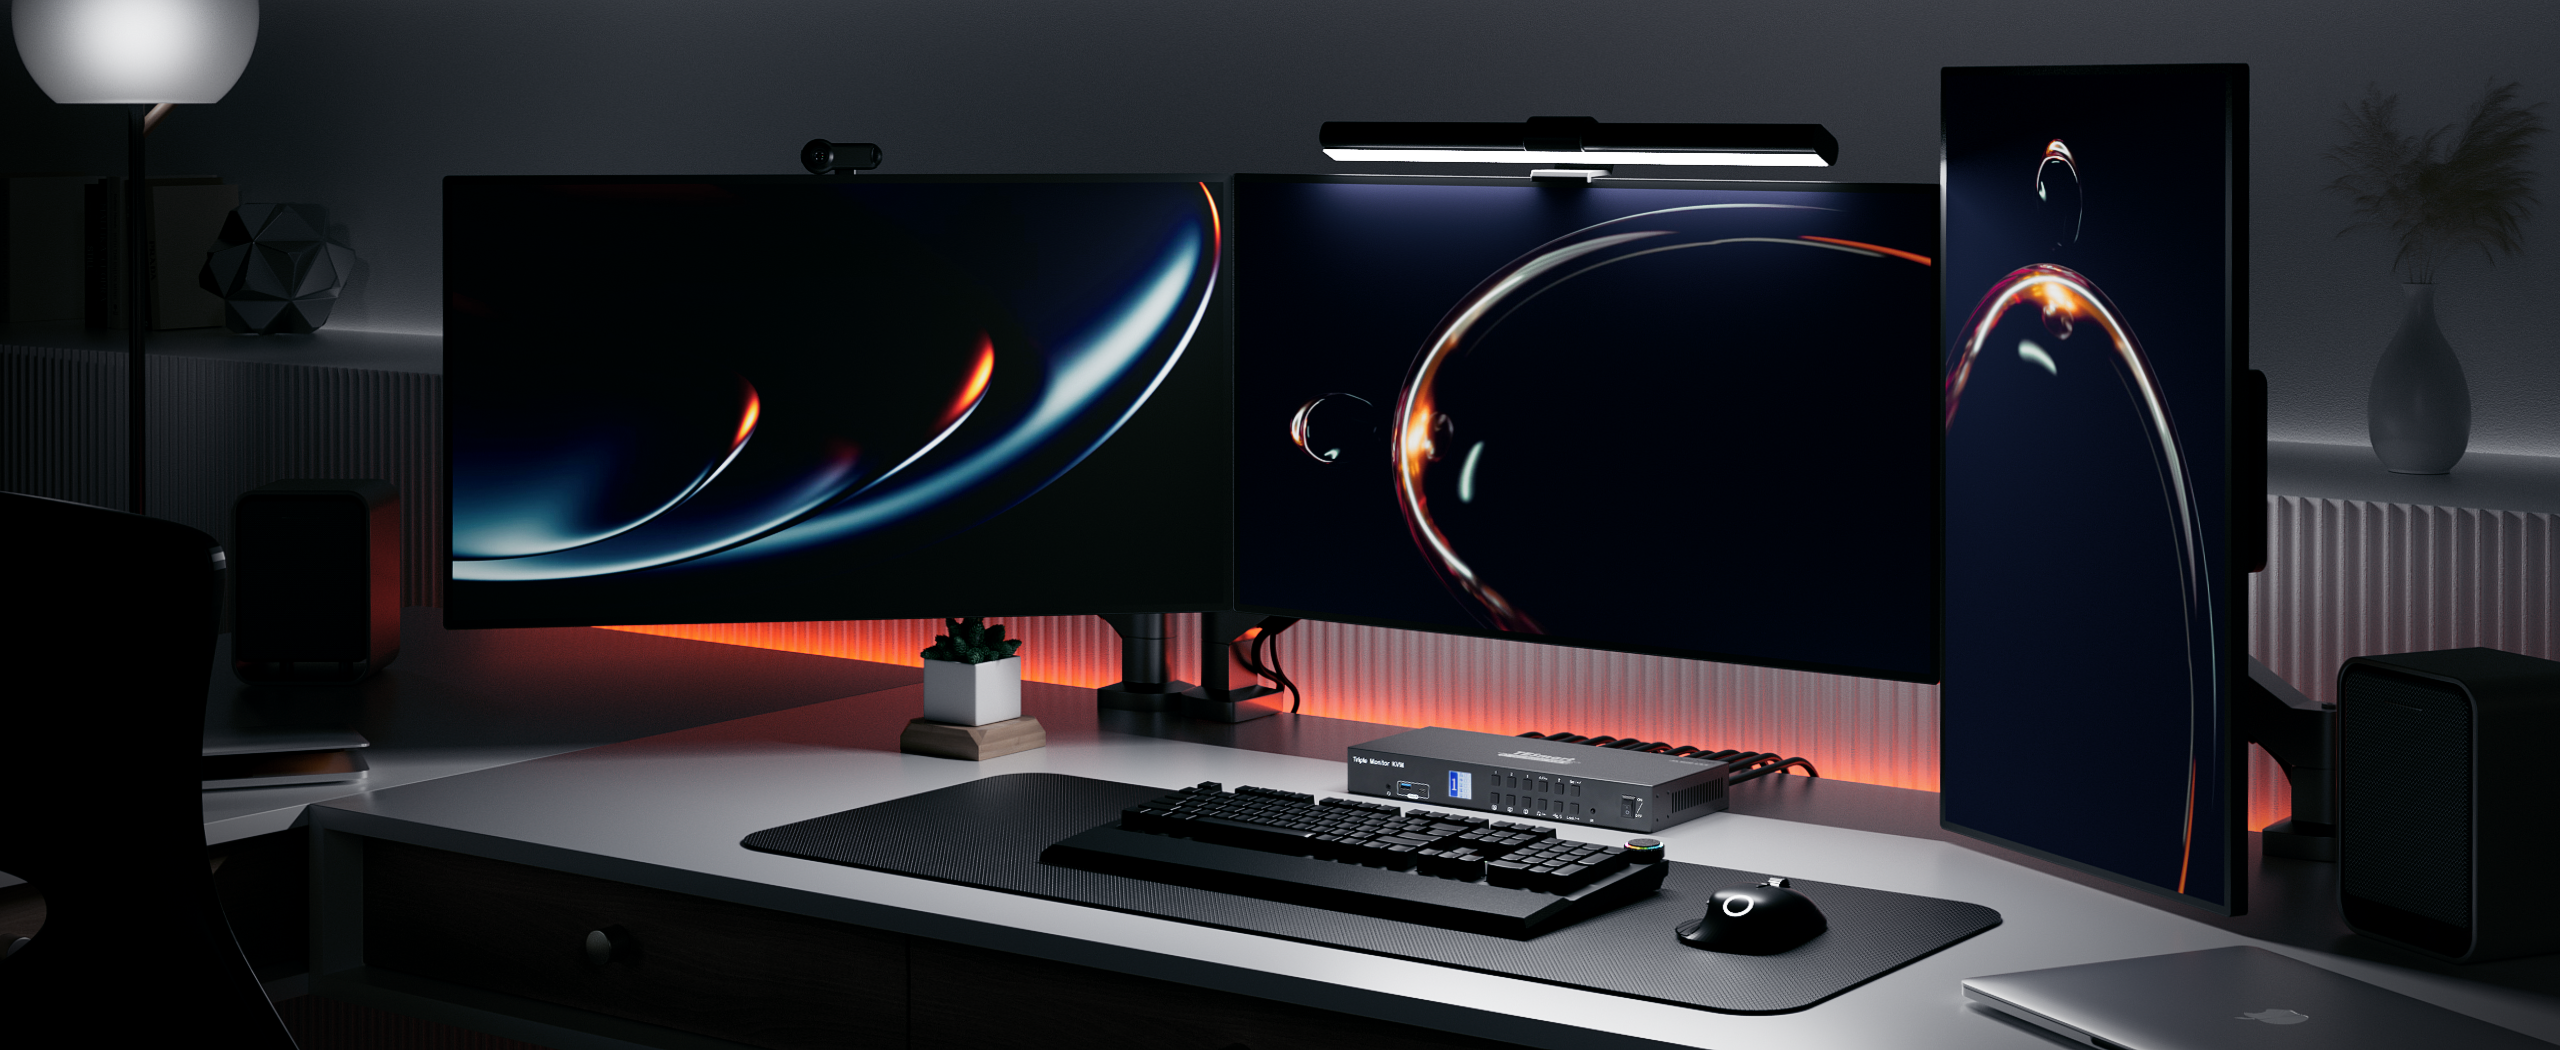 Ultrawide vs. dual monitors: which should you buy?